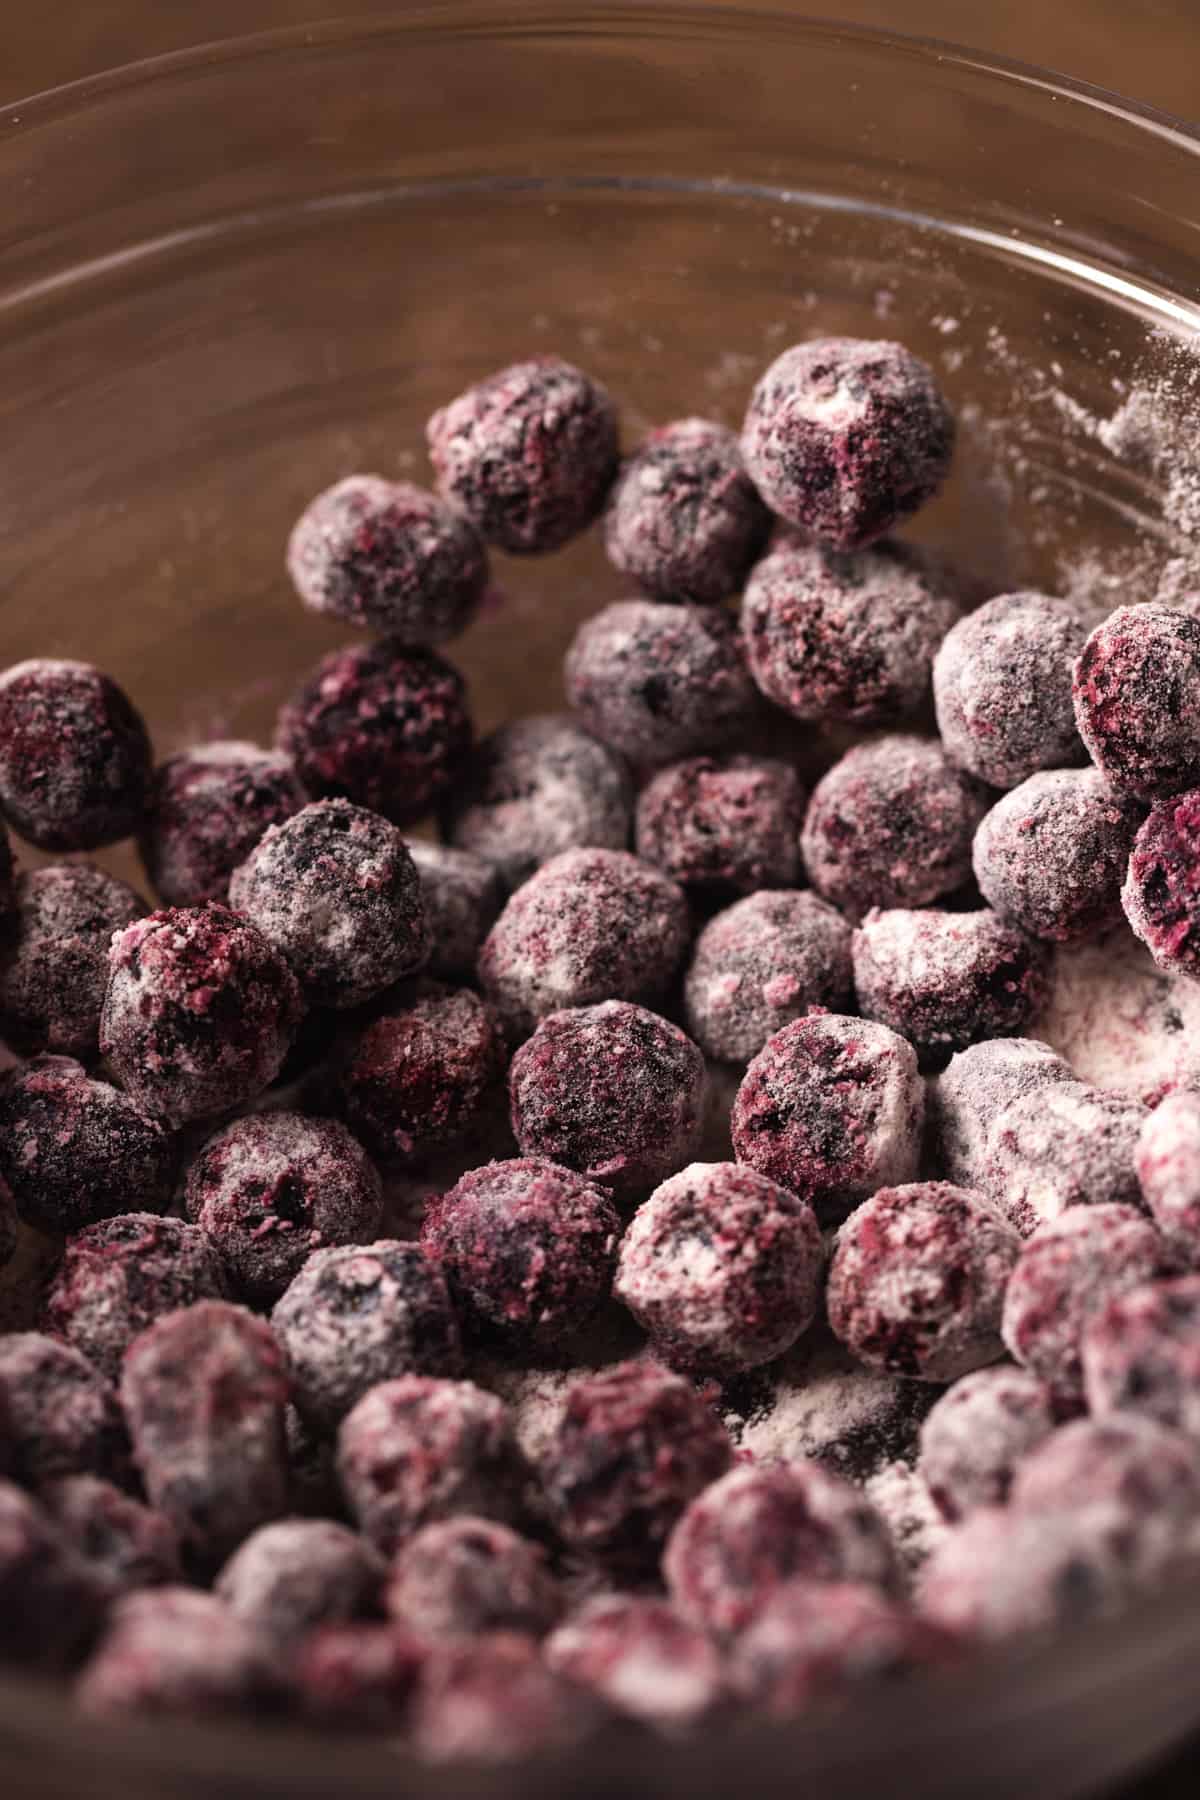 Blueberries coated in flour in a glass bowl.